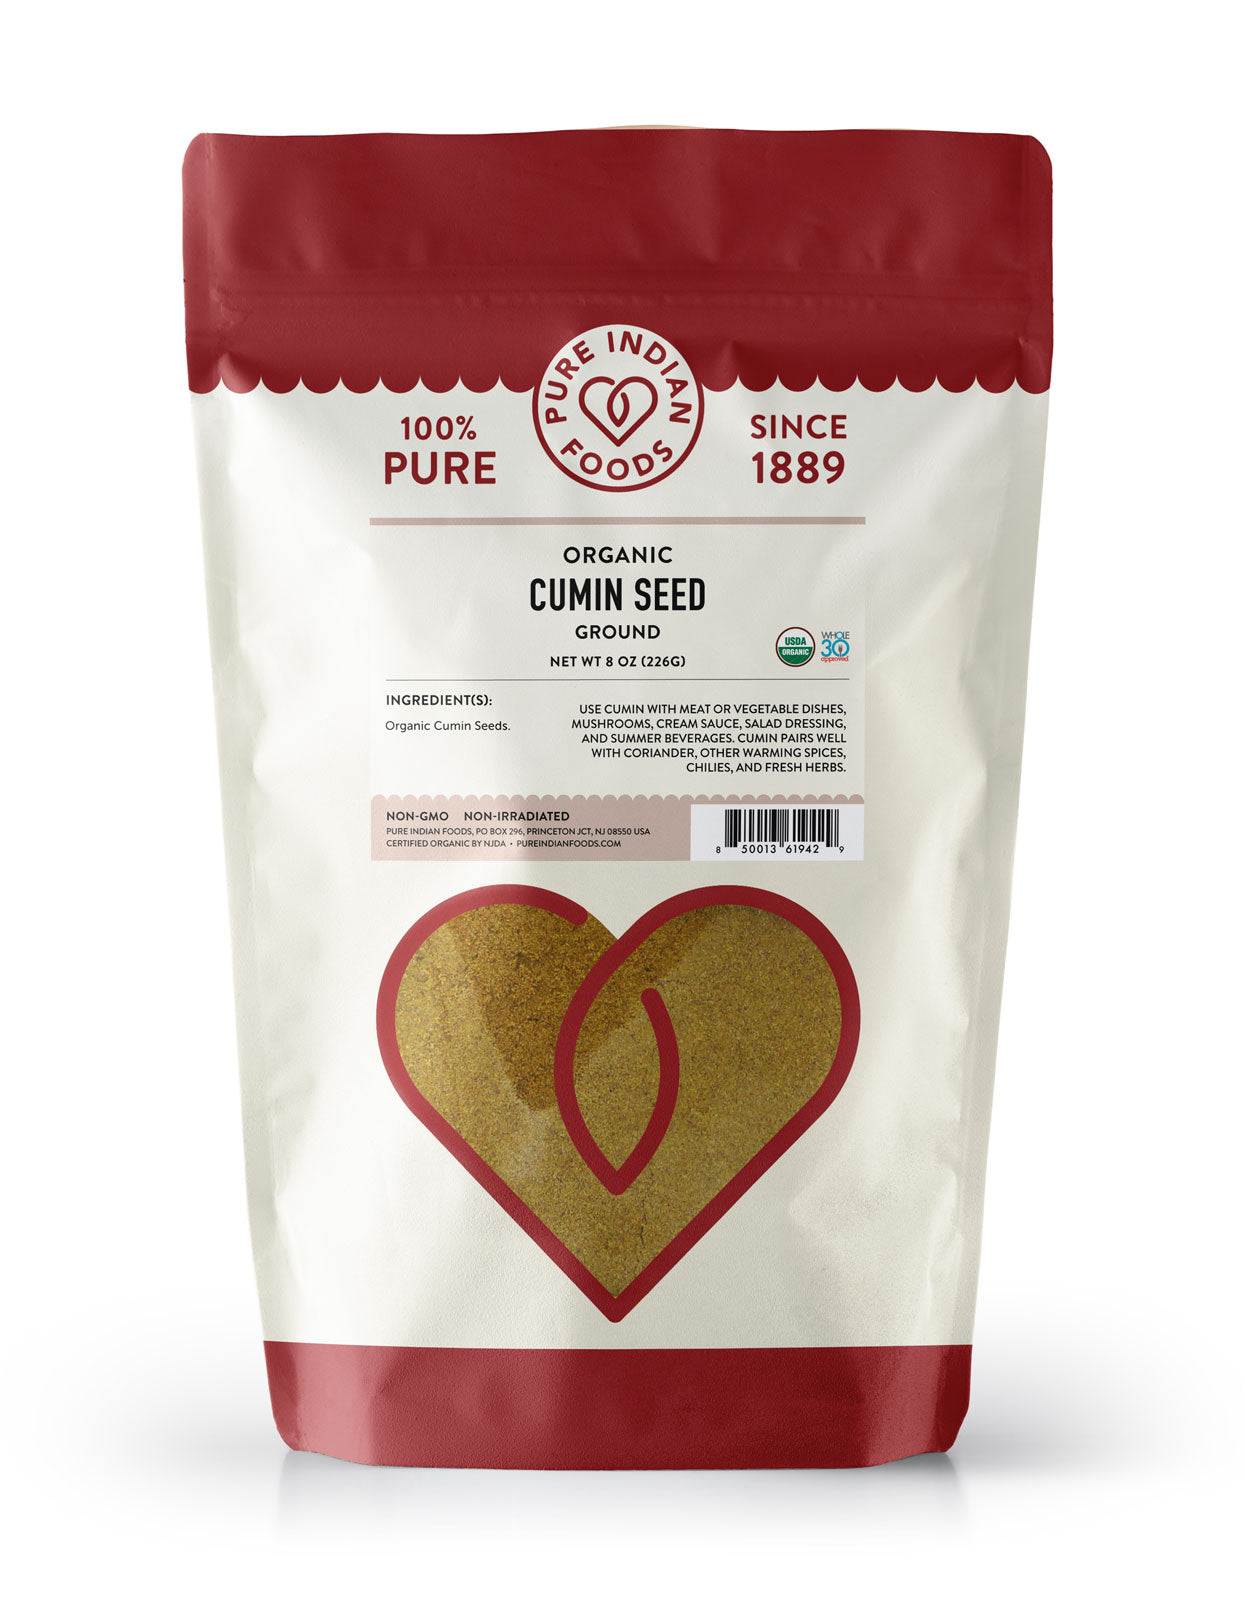 Large package of jeera seeds powder from Pure Indian Foods, also known as organic cumin powder.